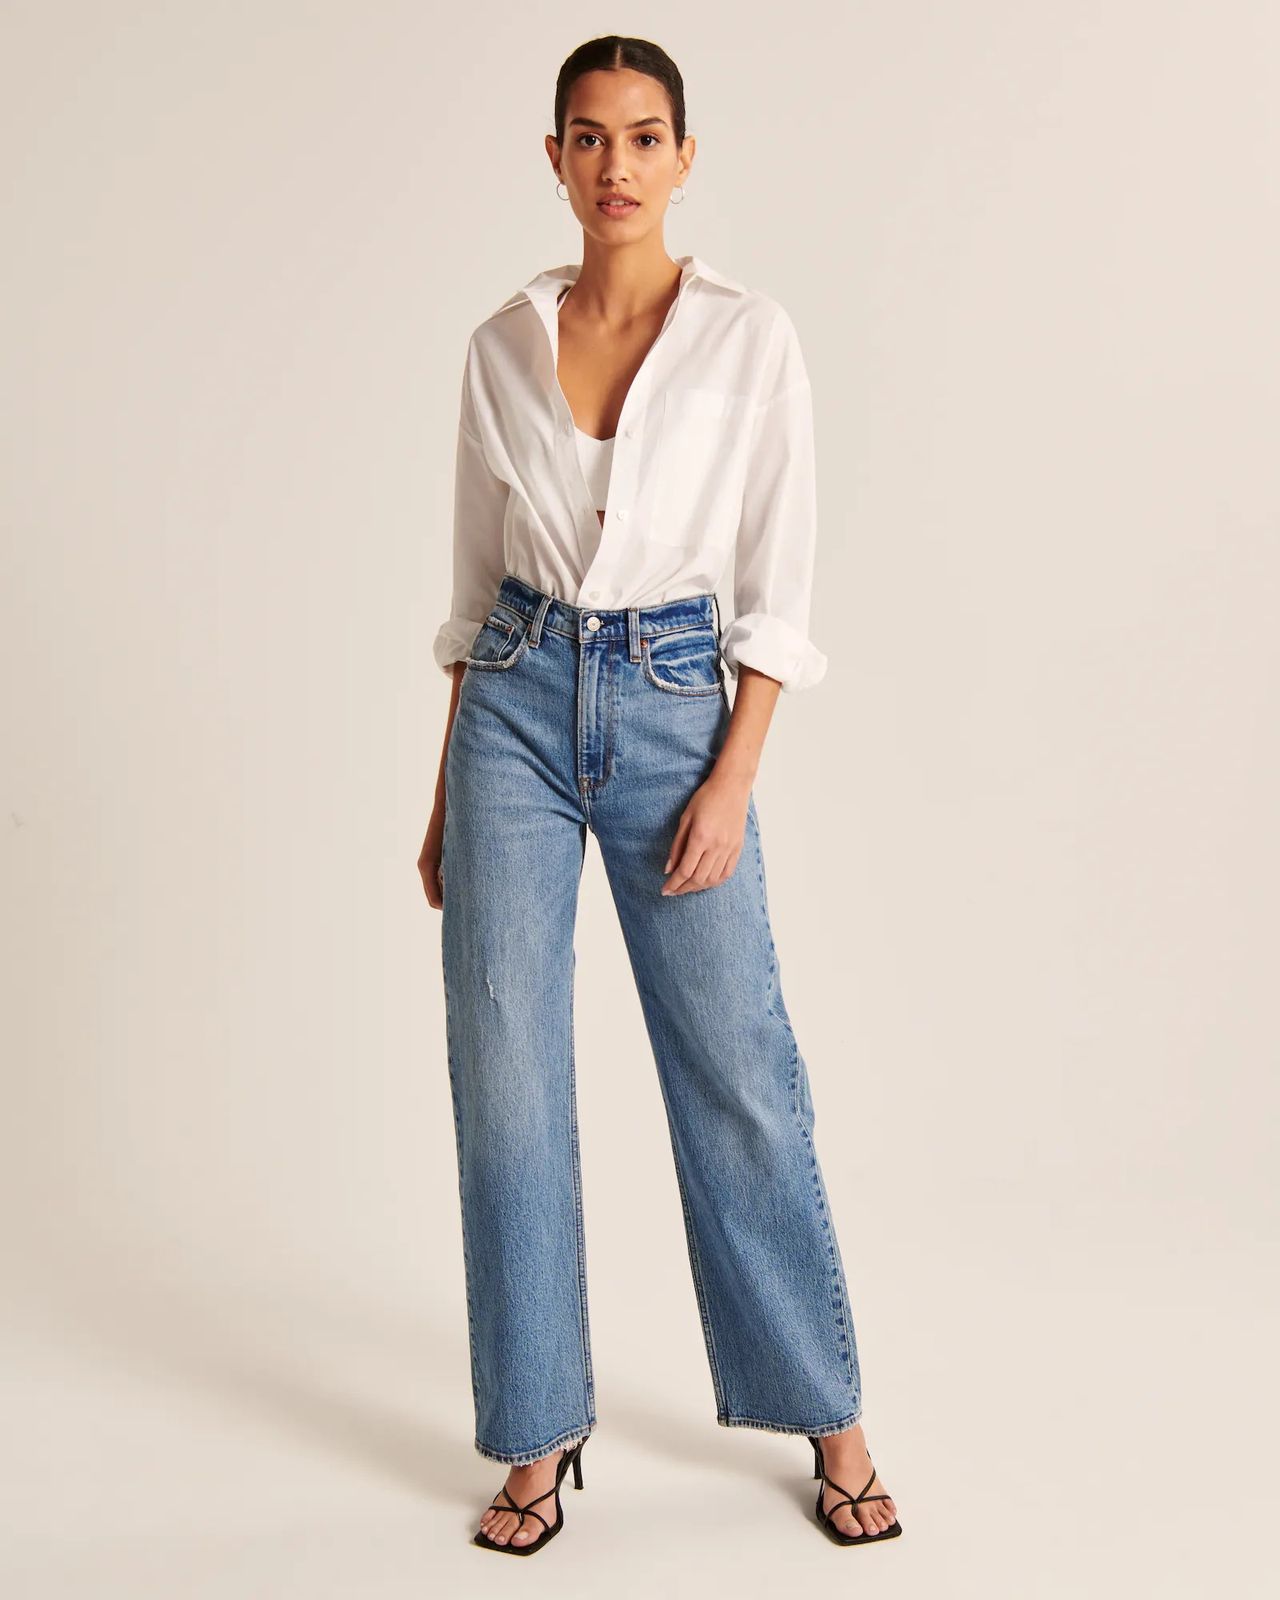 The Best Simple Tops to Wear With Jeans, Trousers, & Skirts | Who What Wear